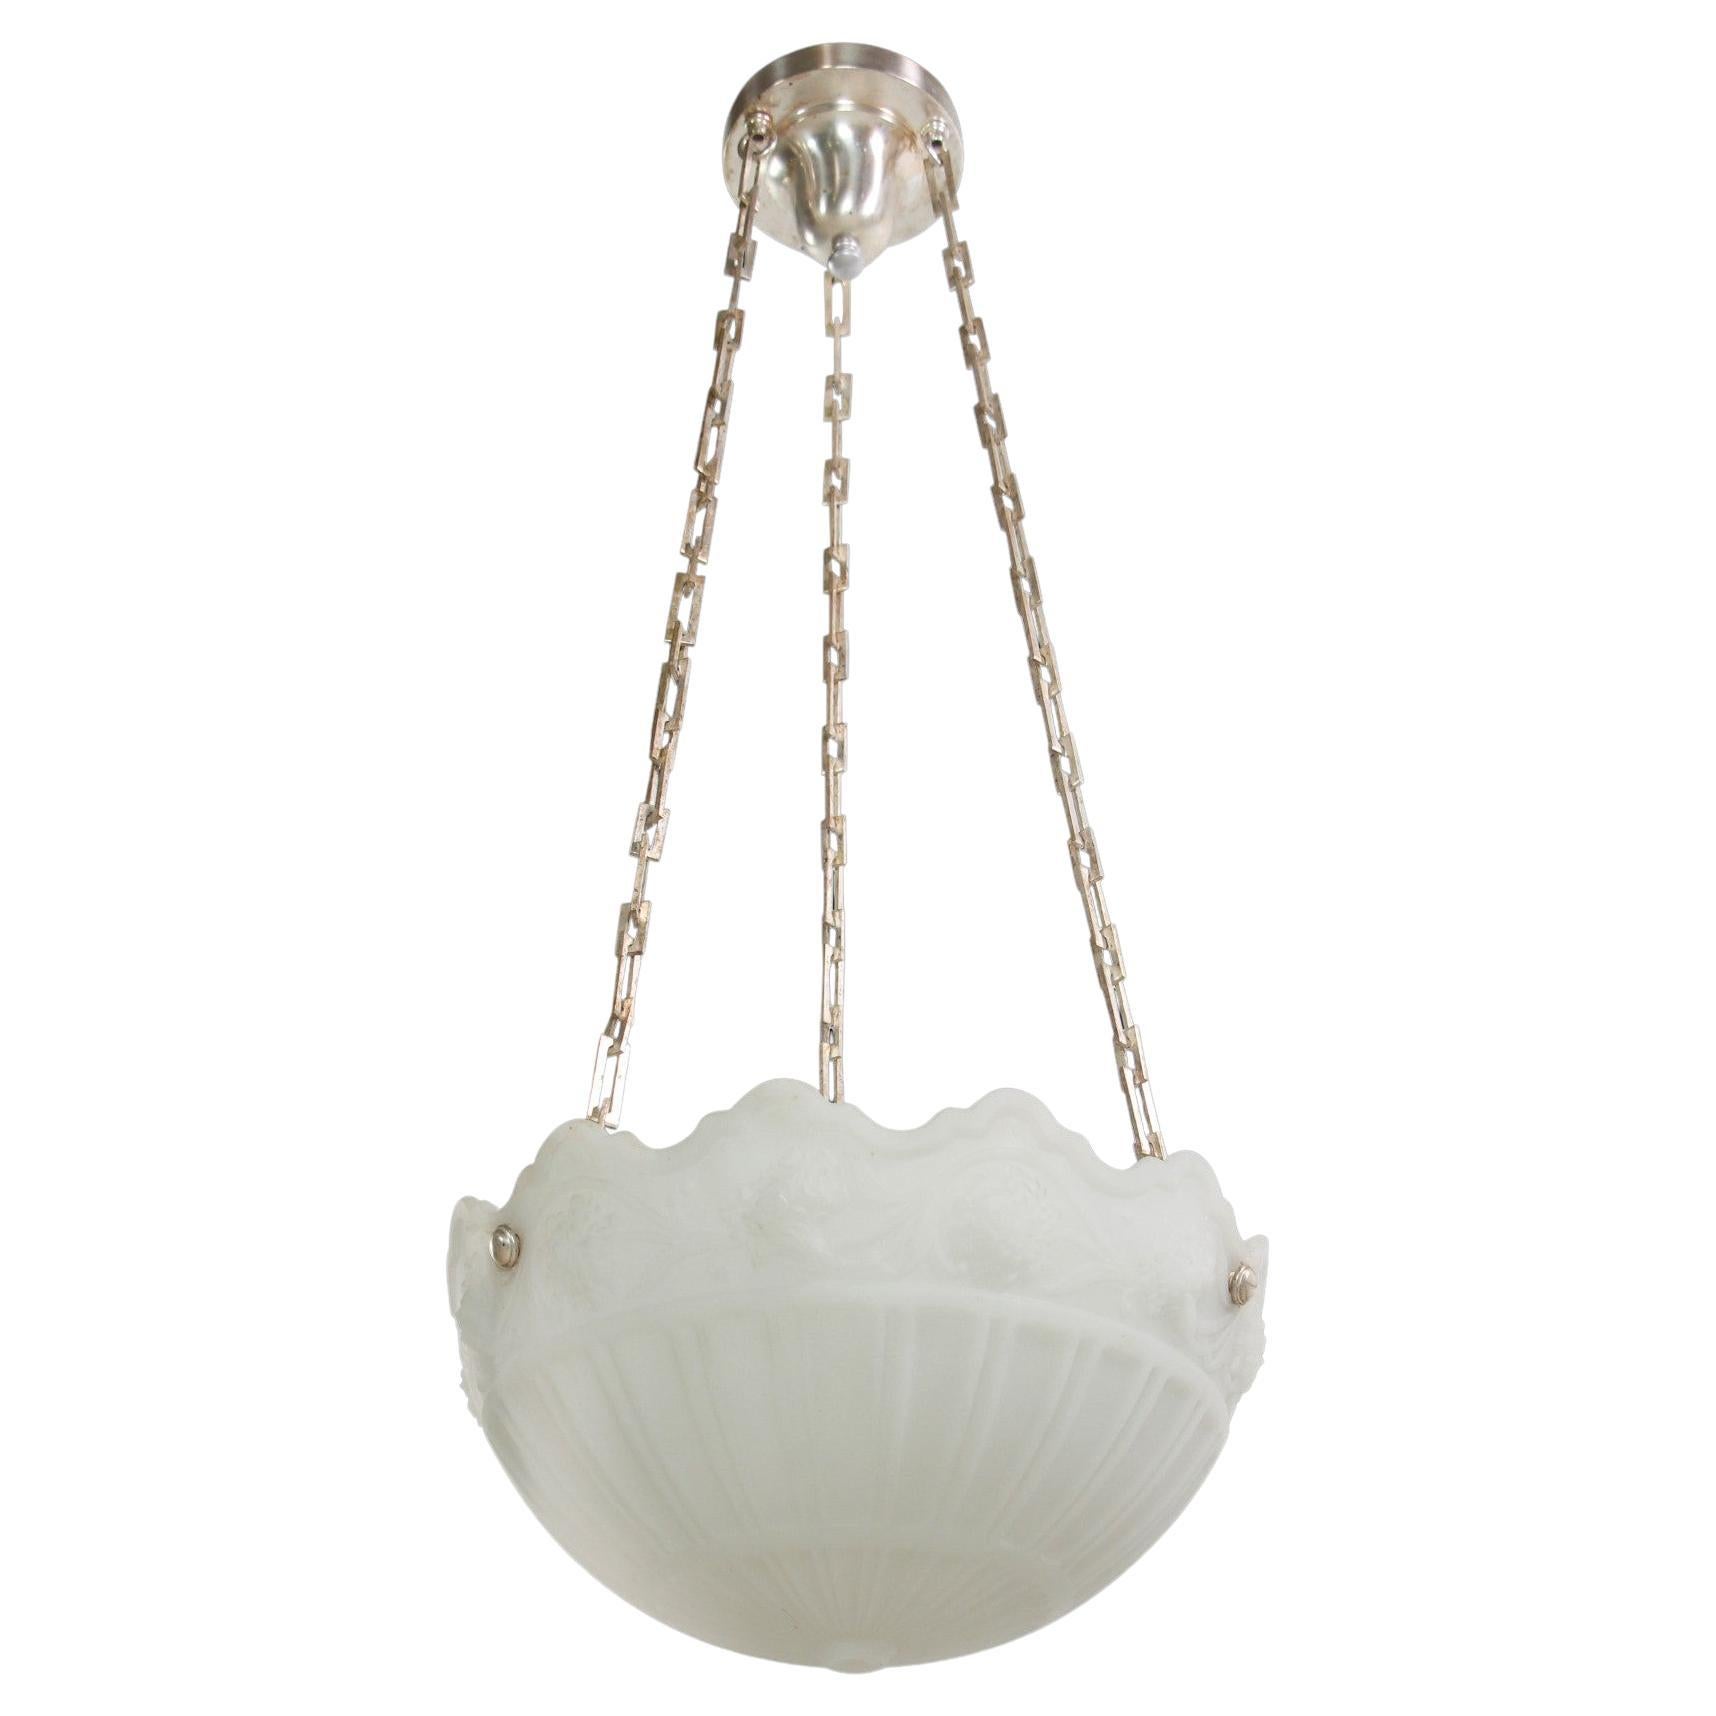 Early 20th century white cast glass dish pendant light with ornate embossed details and featuring the original silver plated brass chain. Replacement nickel plated canopy. This light is original to a Philadelphia mansion. Please note, this item is